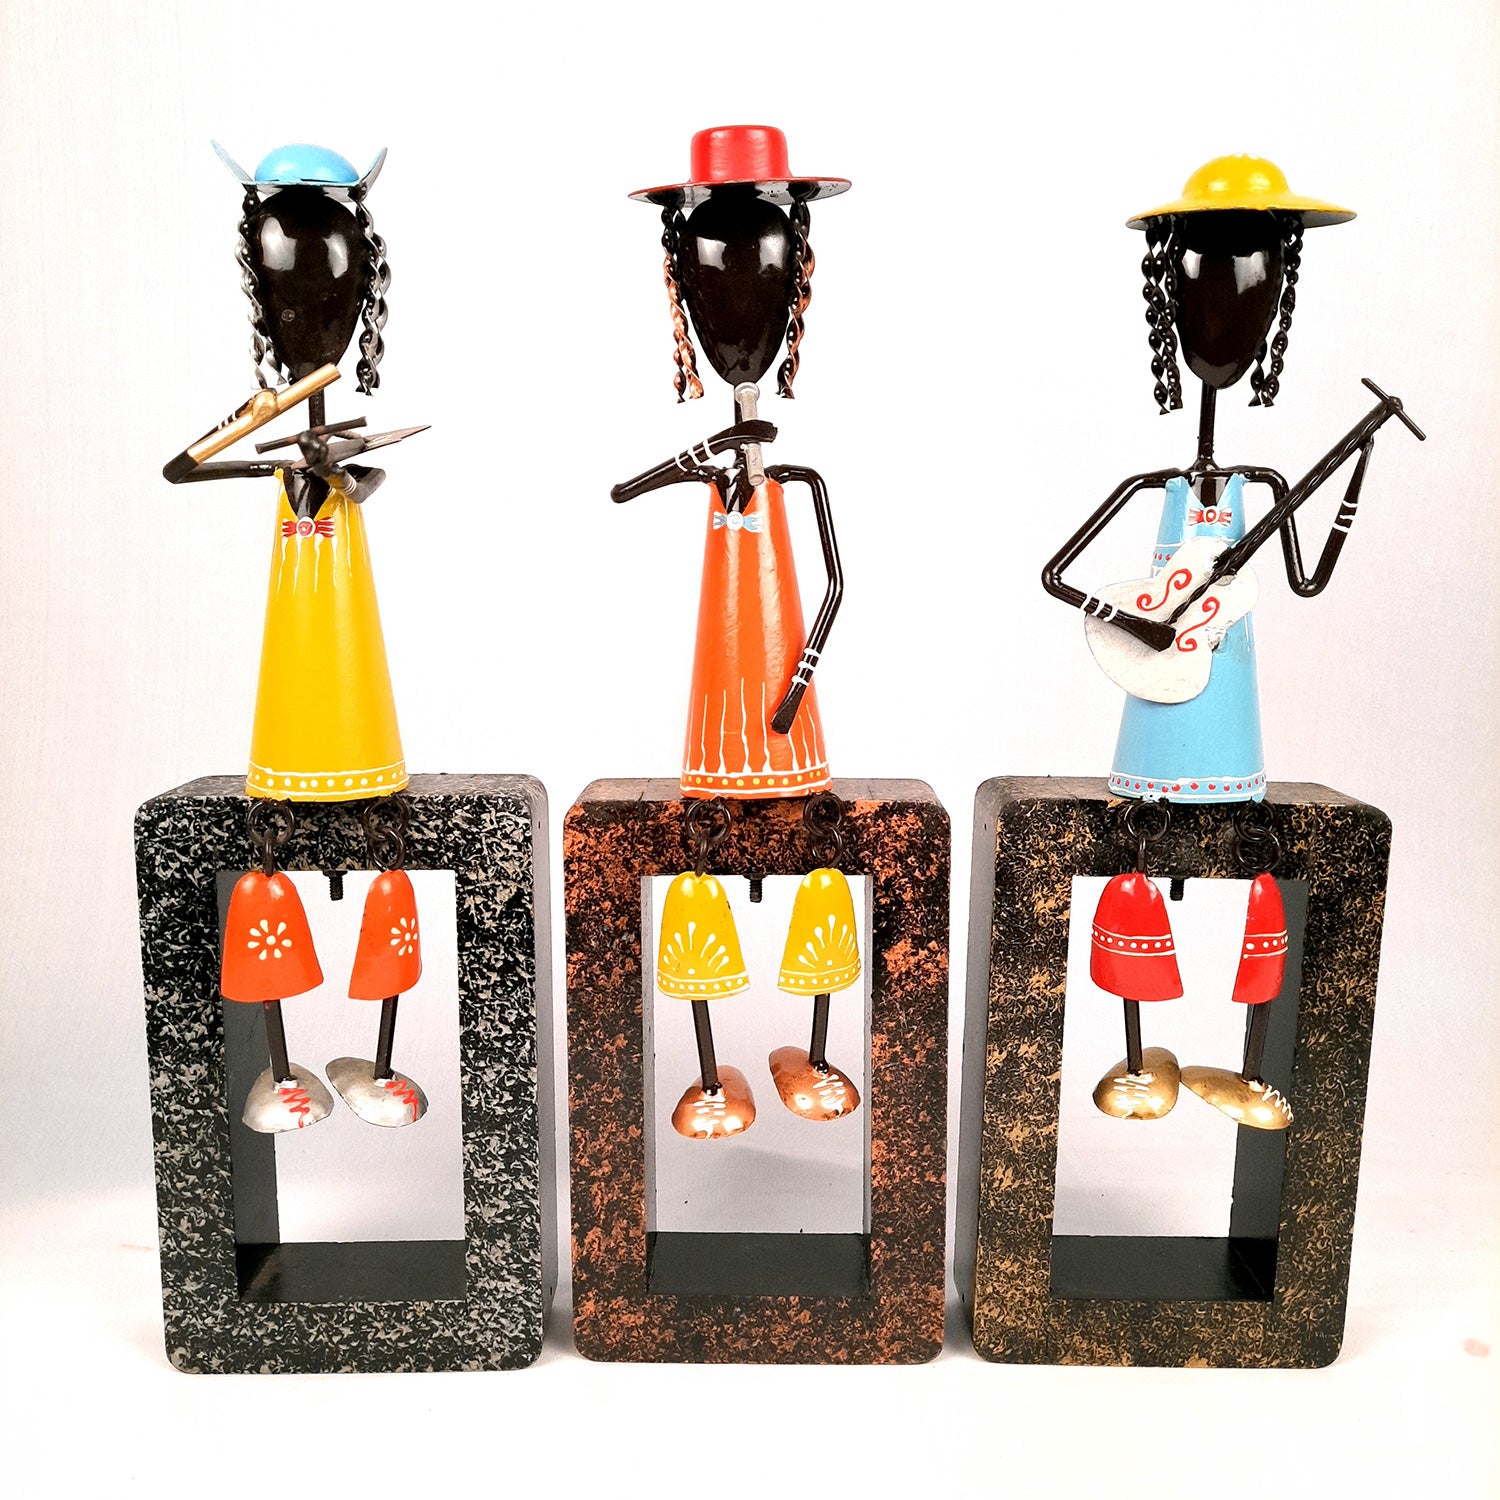 Musician Showpiece Cum Wall Hanging | Figurines Playing Musical Instruments With Hanging Legs | Decorative Showpieces - For Home, Table, Living Room, TV Unit, Balcony, Wall Decor & Gifts - 16 Inch (Set of 3) - Apkamart